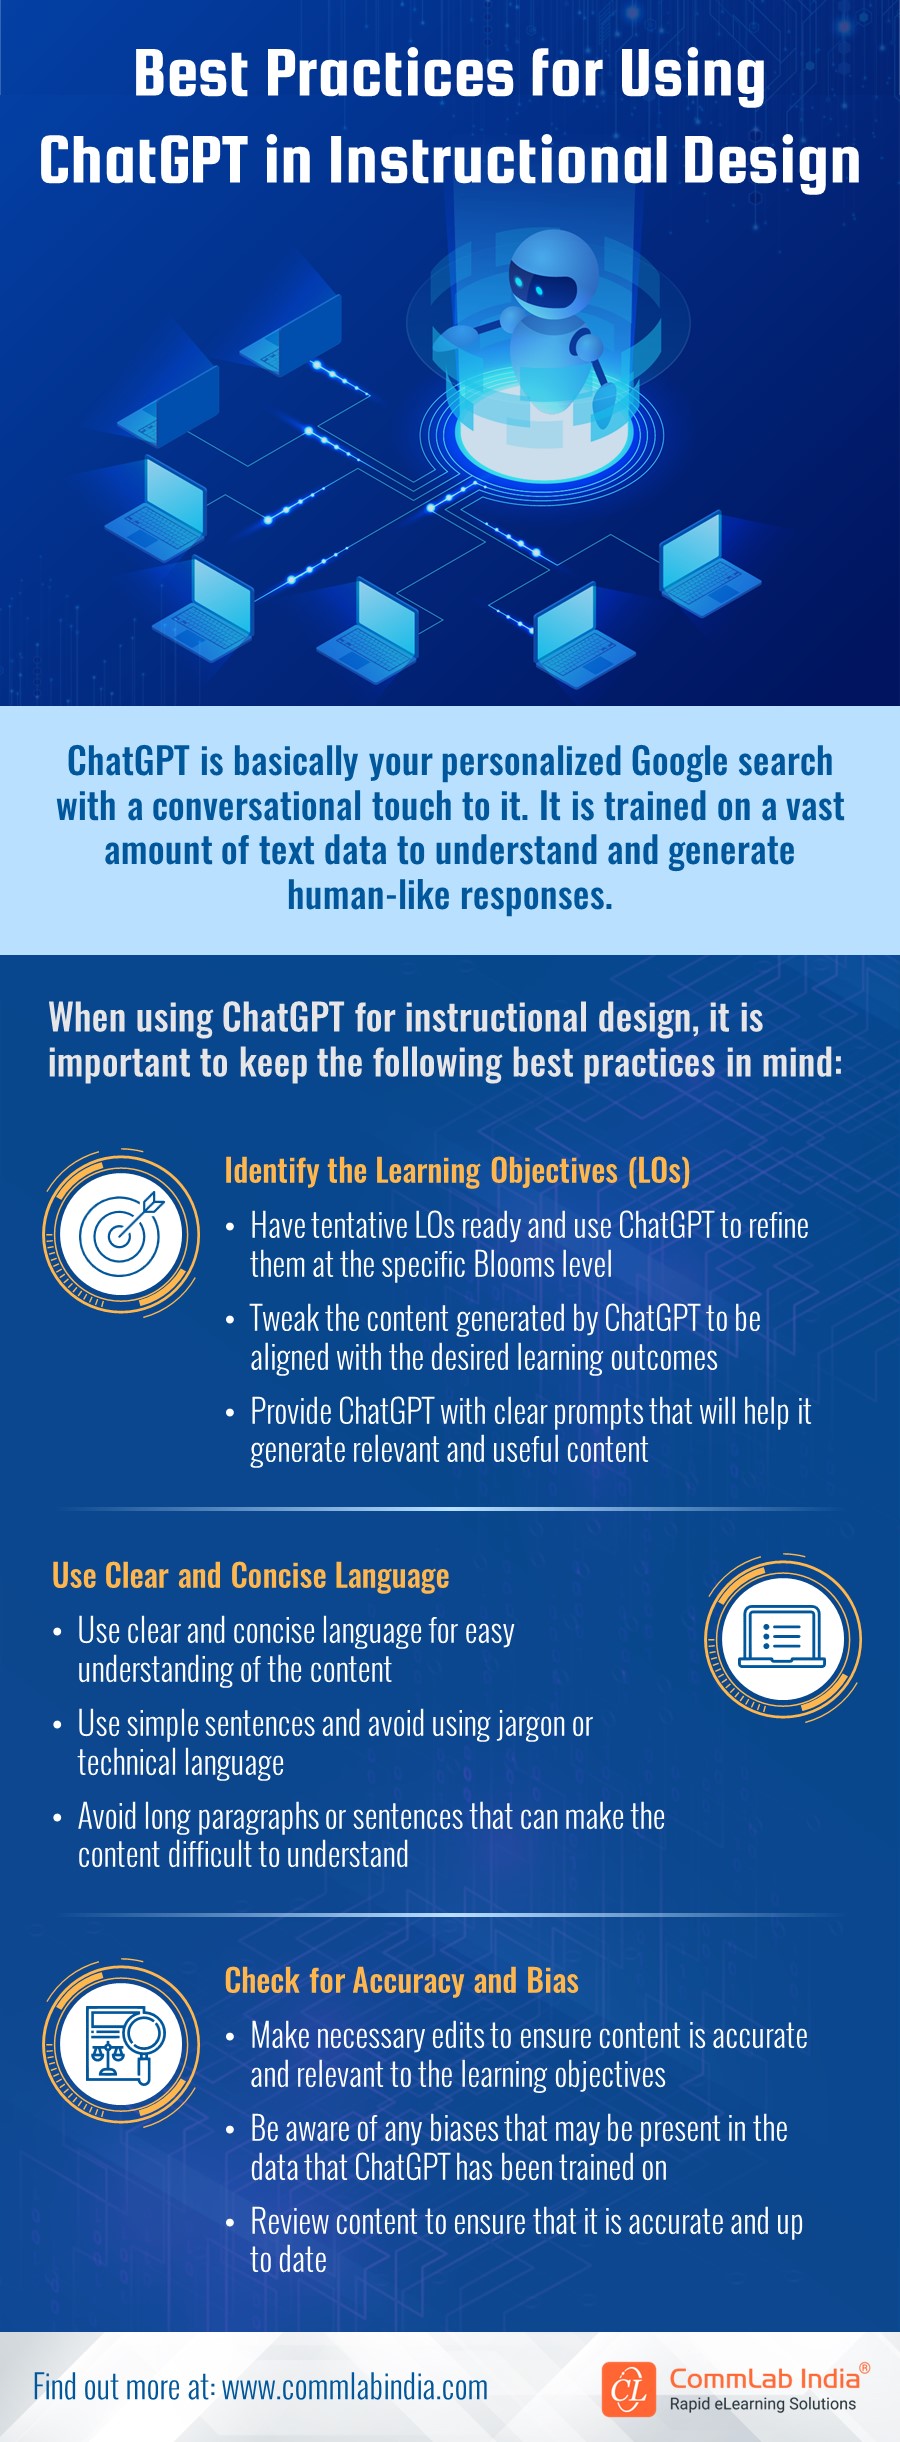 Instructional Design – Best Practices to Follow with ChatGPT [Infographic]